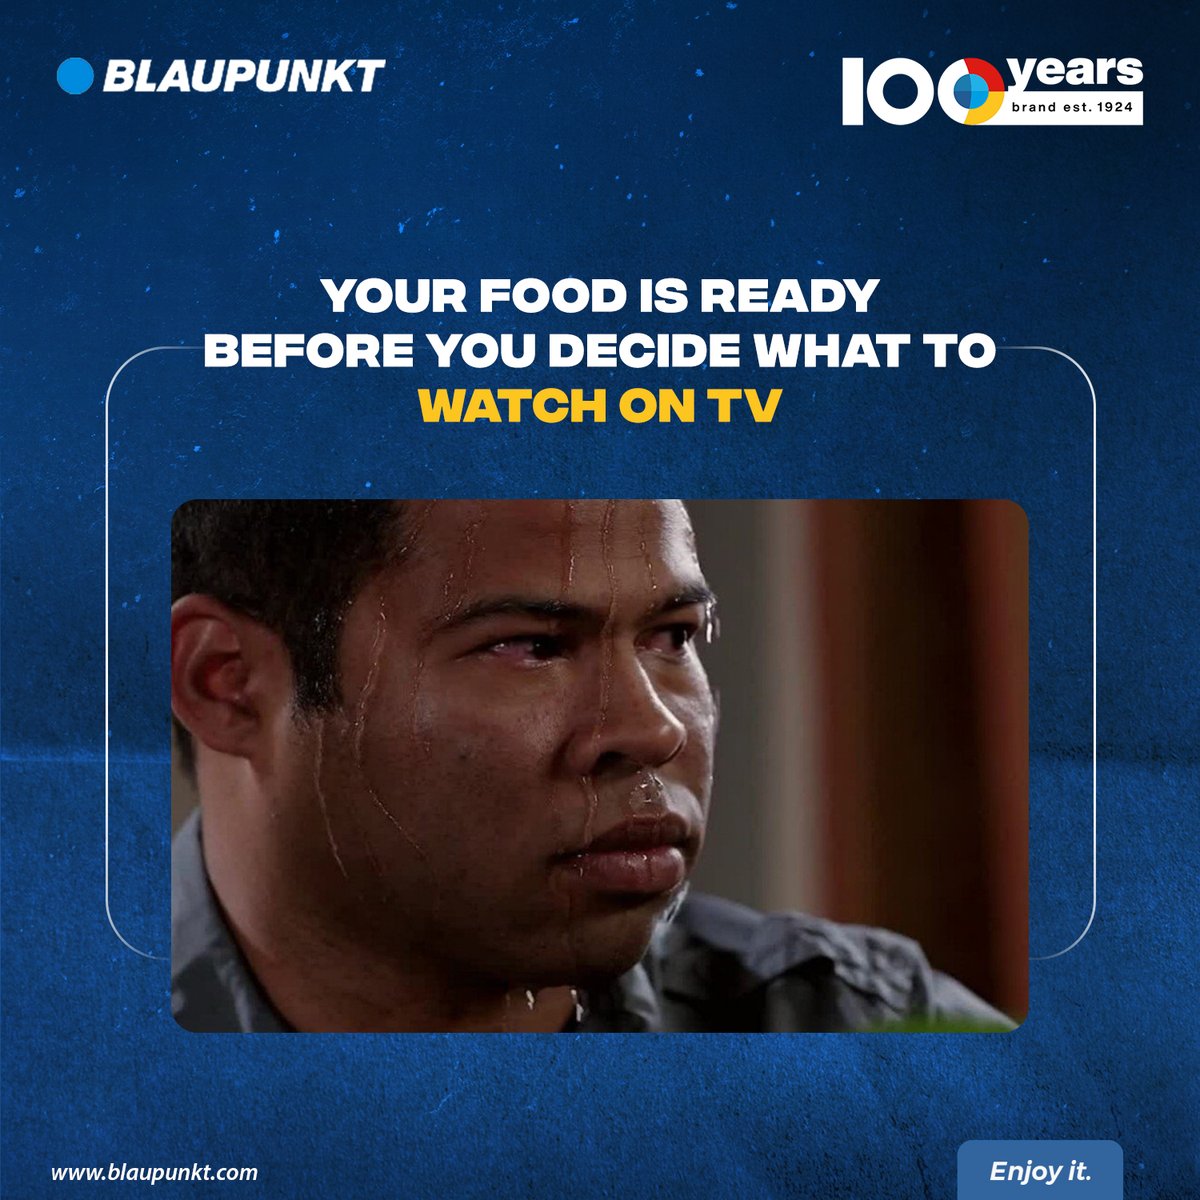 With so many options, this is bound to happen. Has this ever happened to you? Let us know in the comments.

#Blaupunkt #BlaupunktIndia #Entertainment #Television #OTT #BuyNow #Friends #Series #FavouriteSeries #Meme